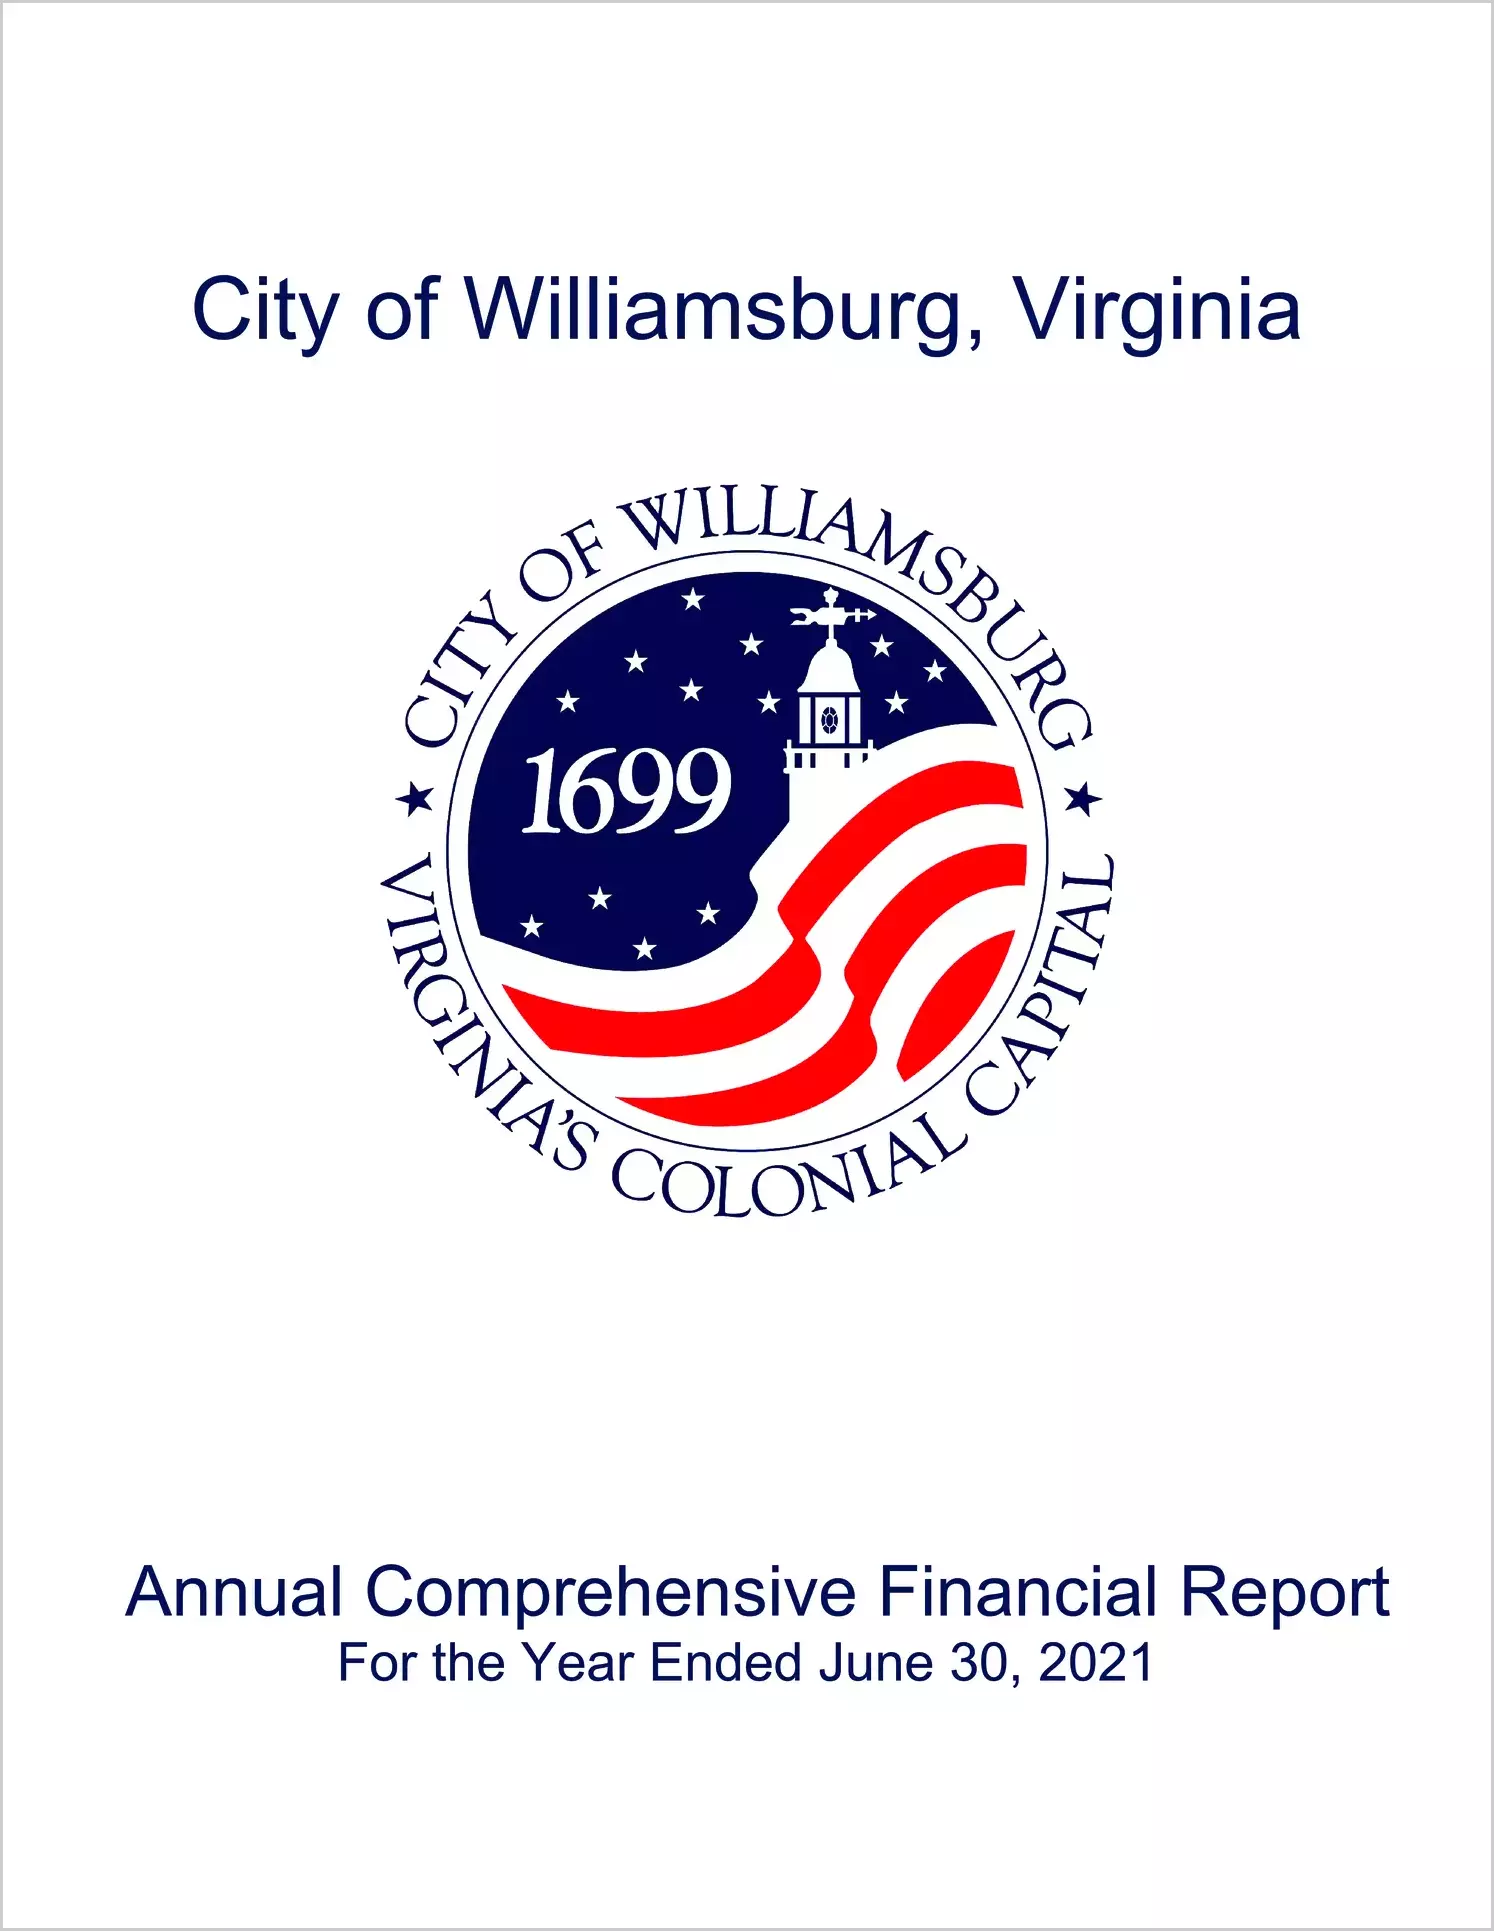 2021 Annual Financial Report for City of Williamsburg